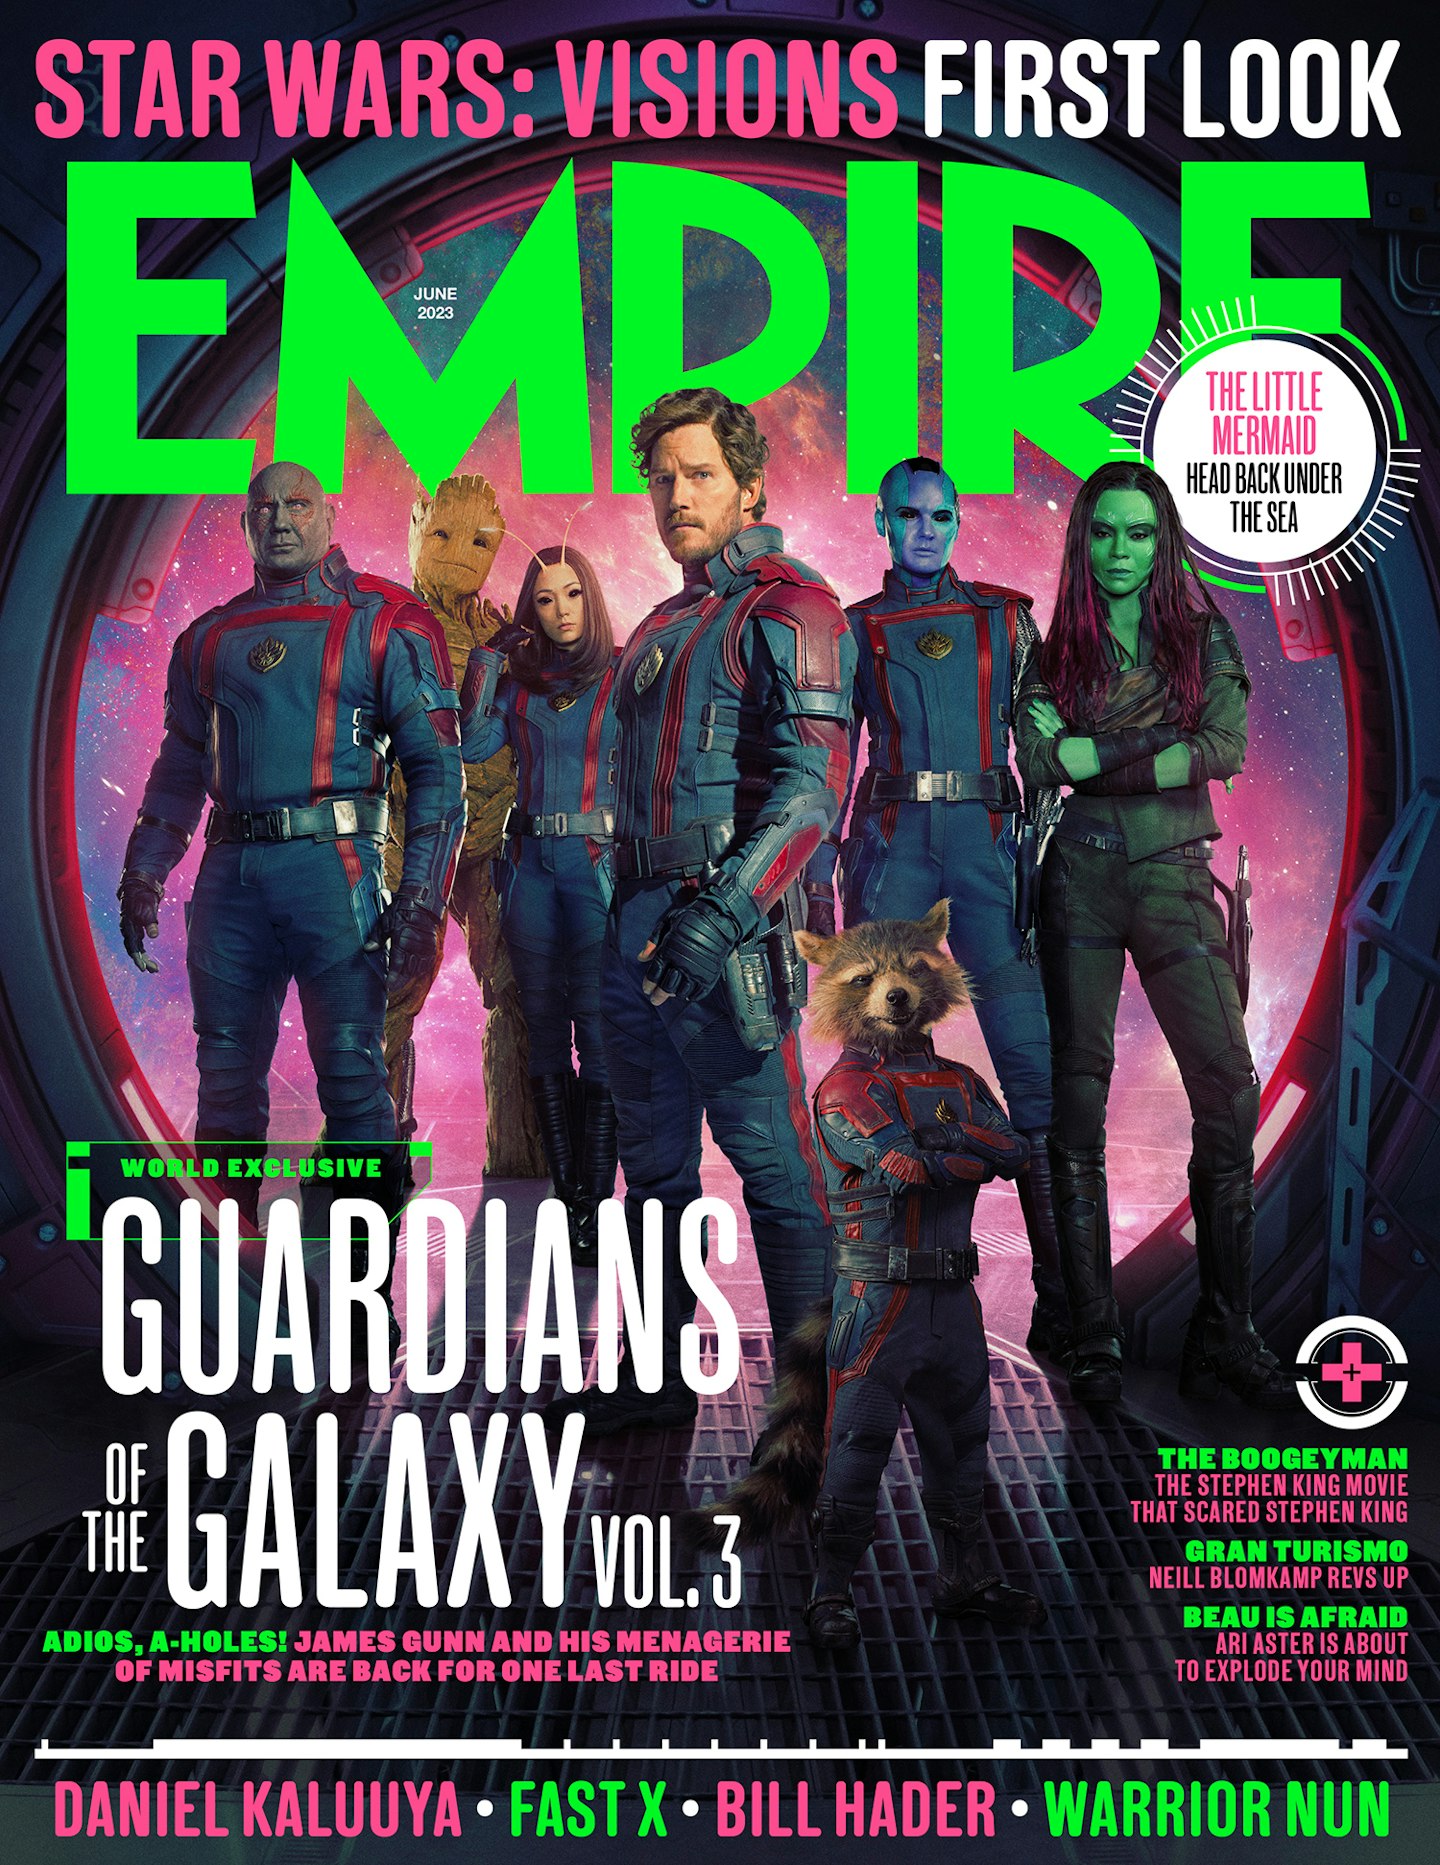 Empire – June 2023 – Guardians Of The Galaxy Vol. 3 cover